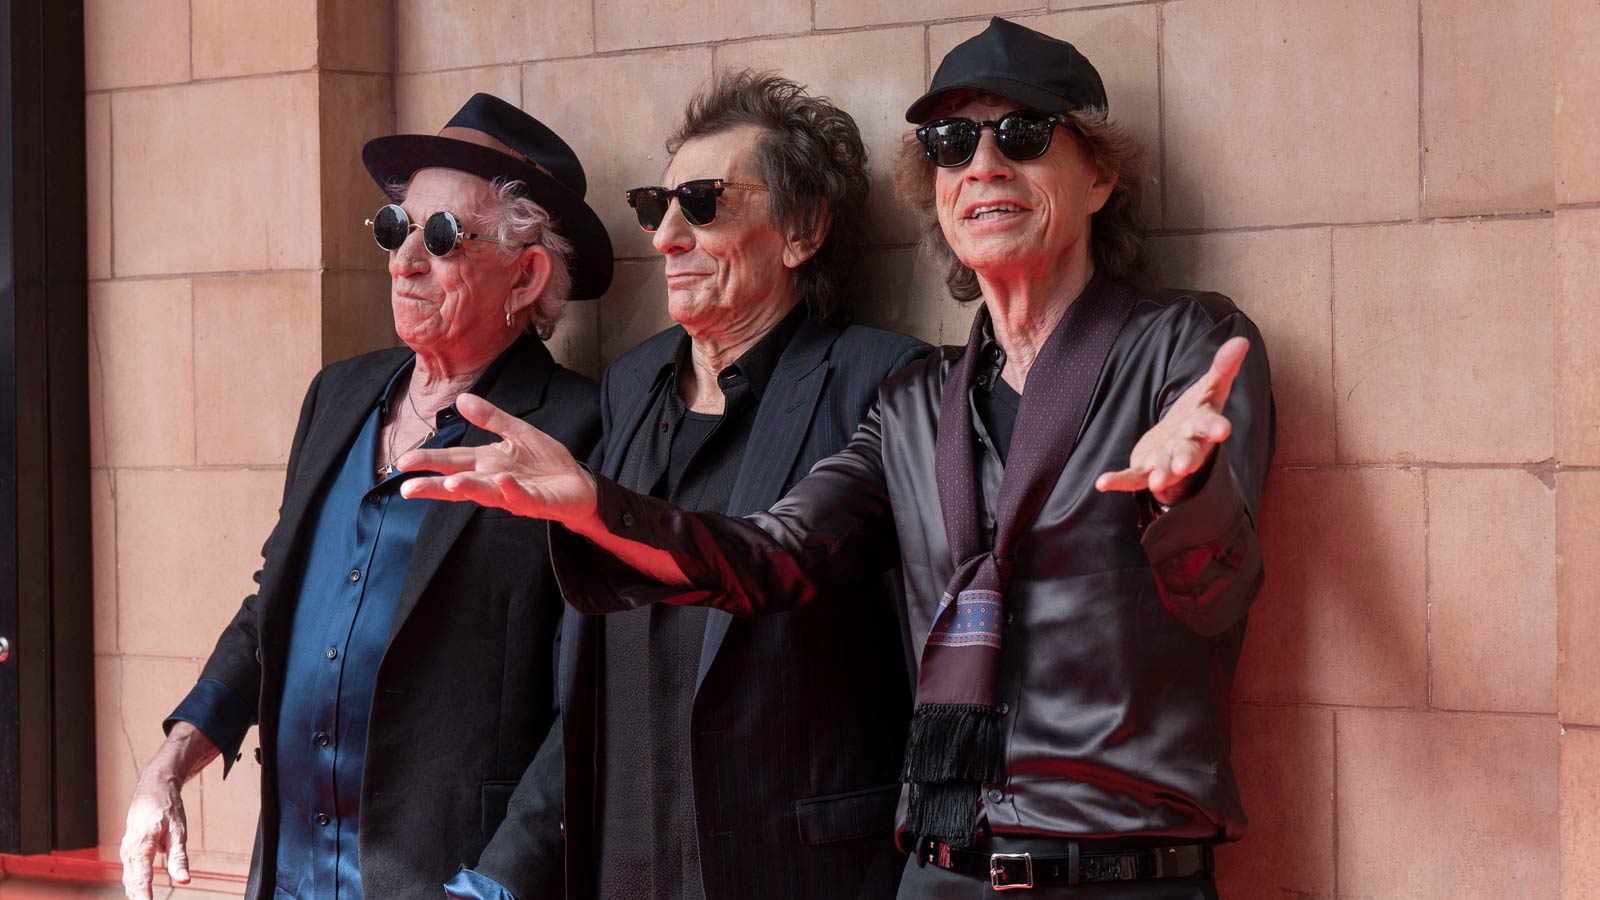 The Rolling Stones are hitting the road next year on a tour sponsored by  AARP